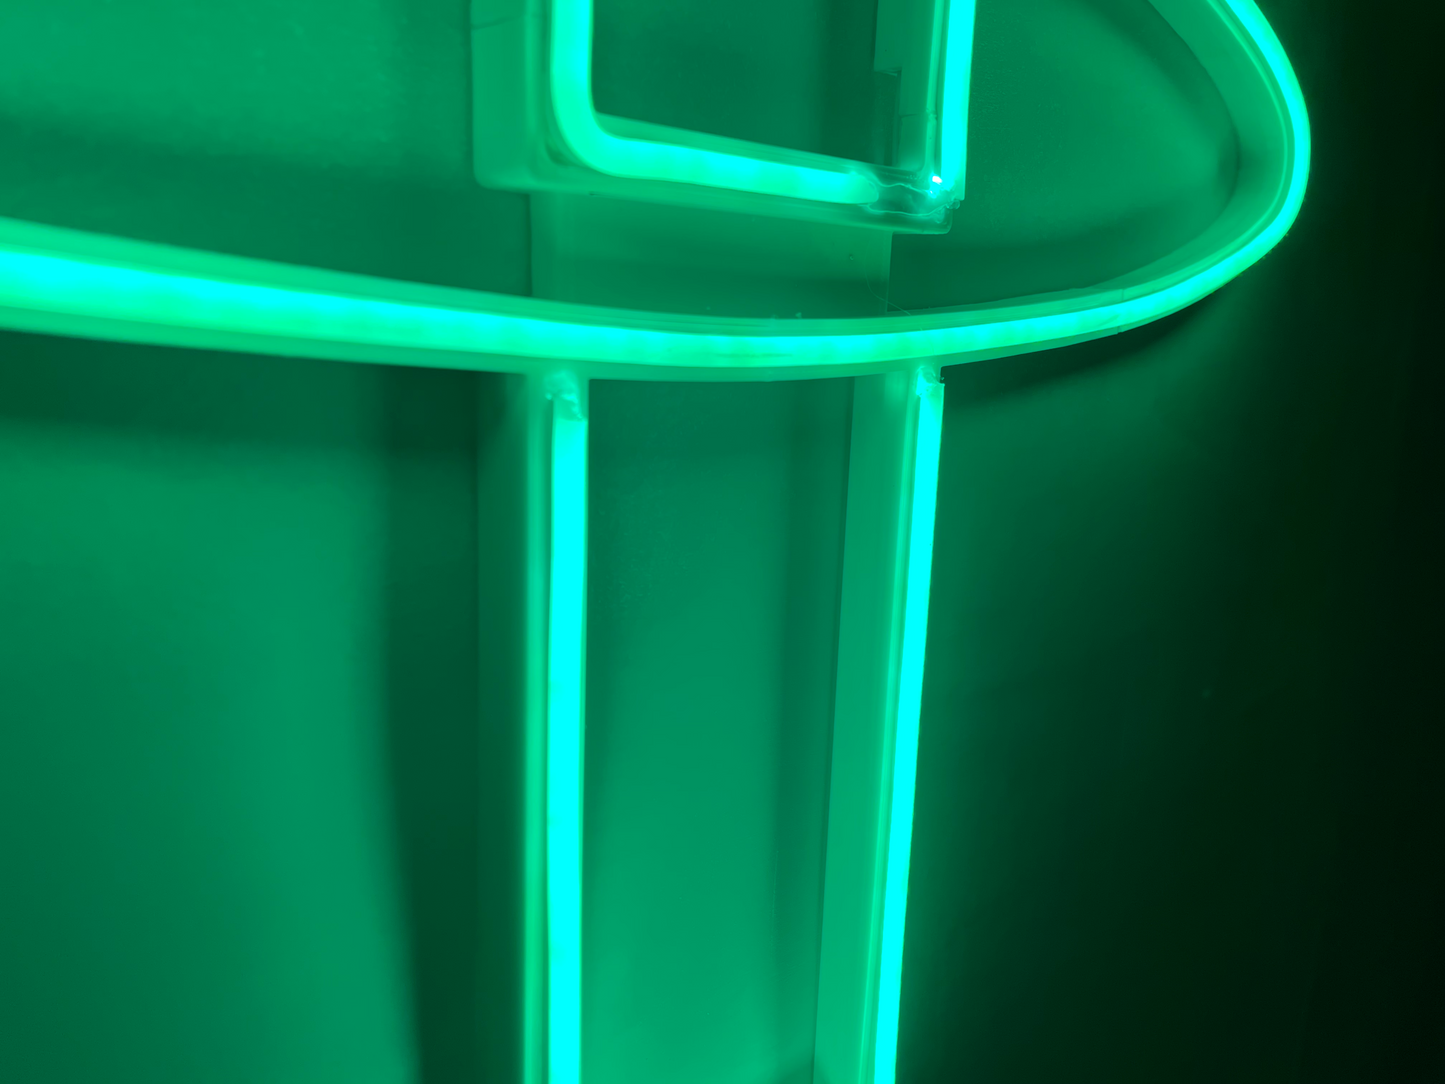 Tether - LED Neon Crypto Sign